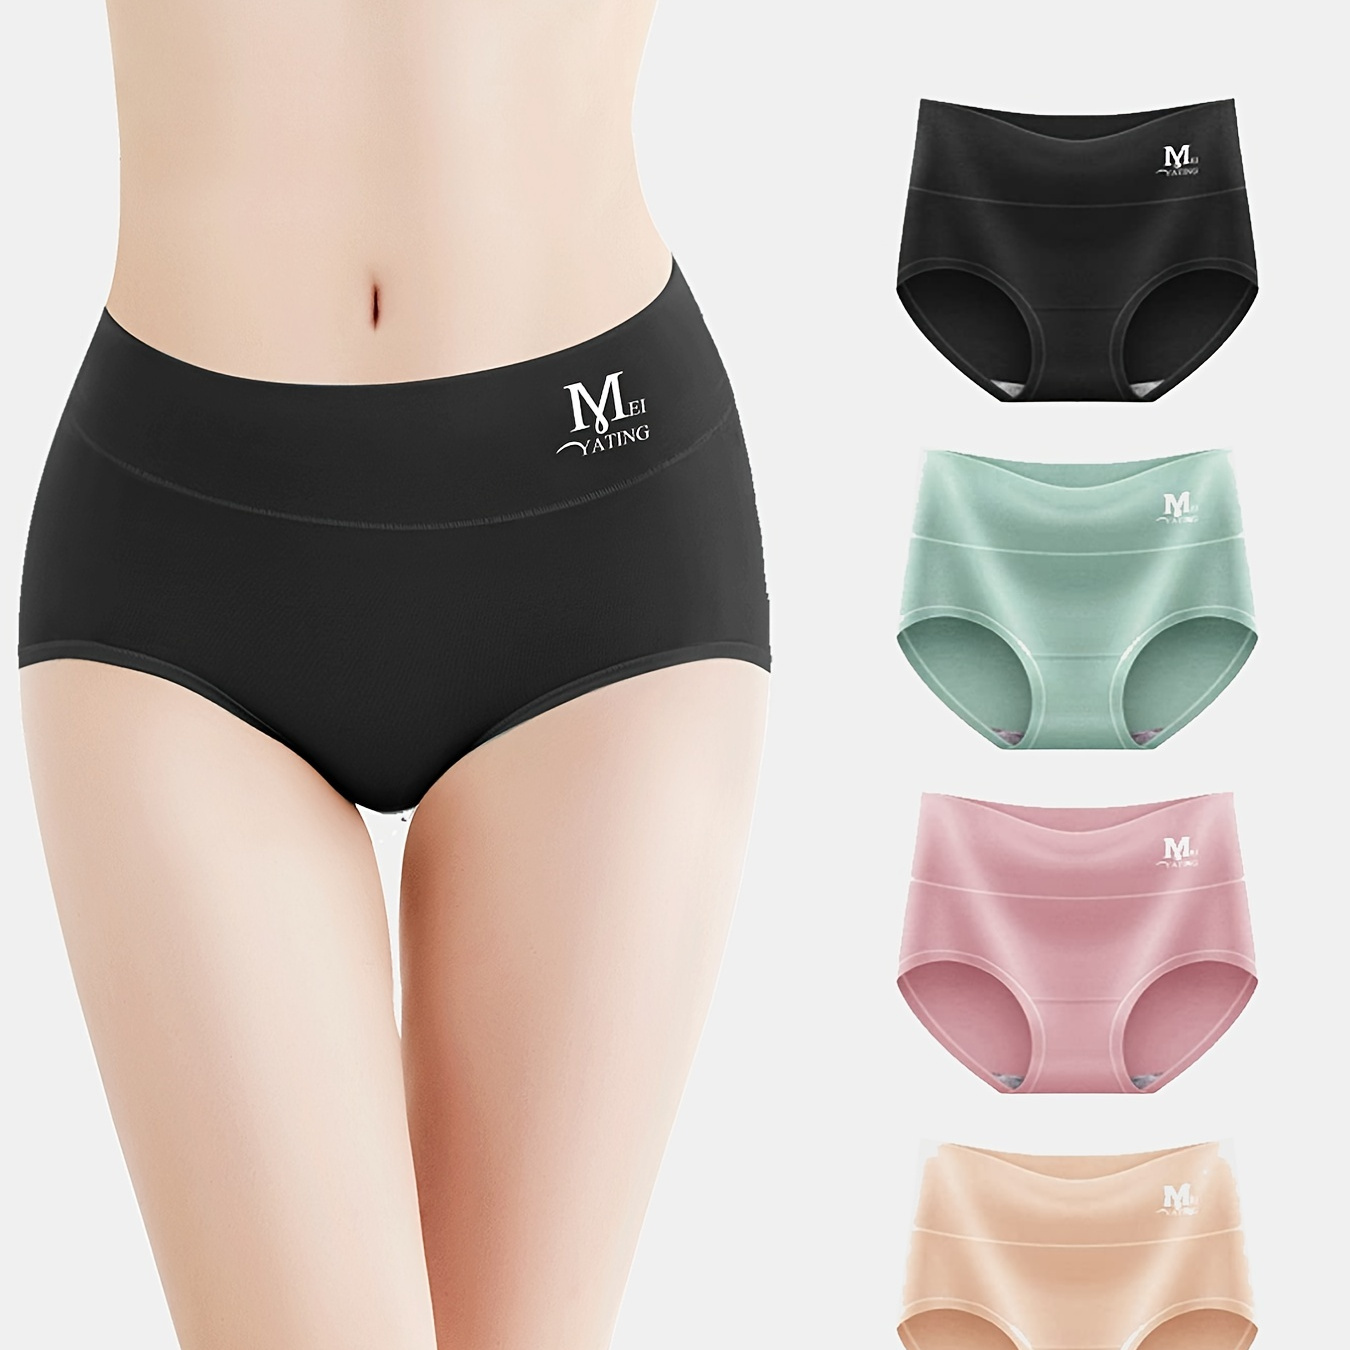  Baseball Mom Women's High Waisted Underwear Soft Briefs  Breathable Panties : Sports & Outdoors